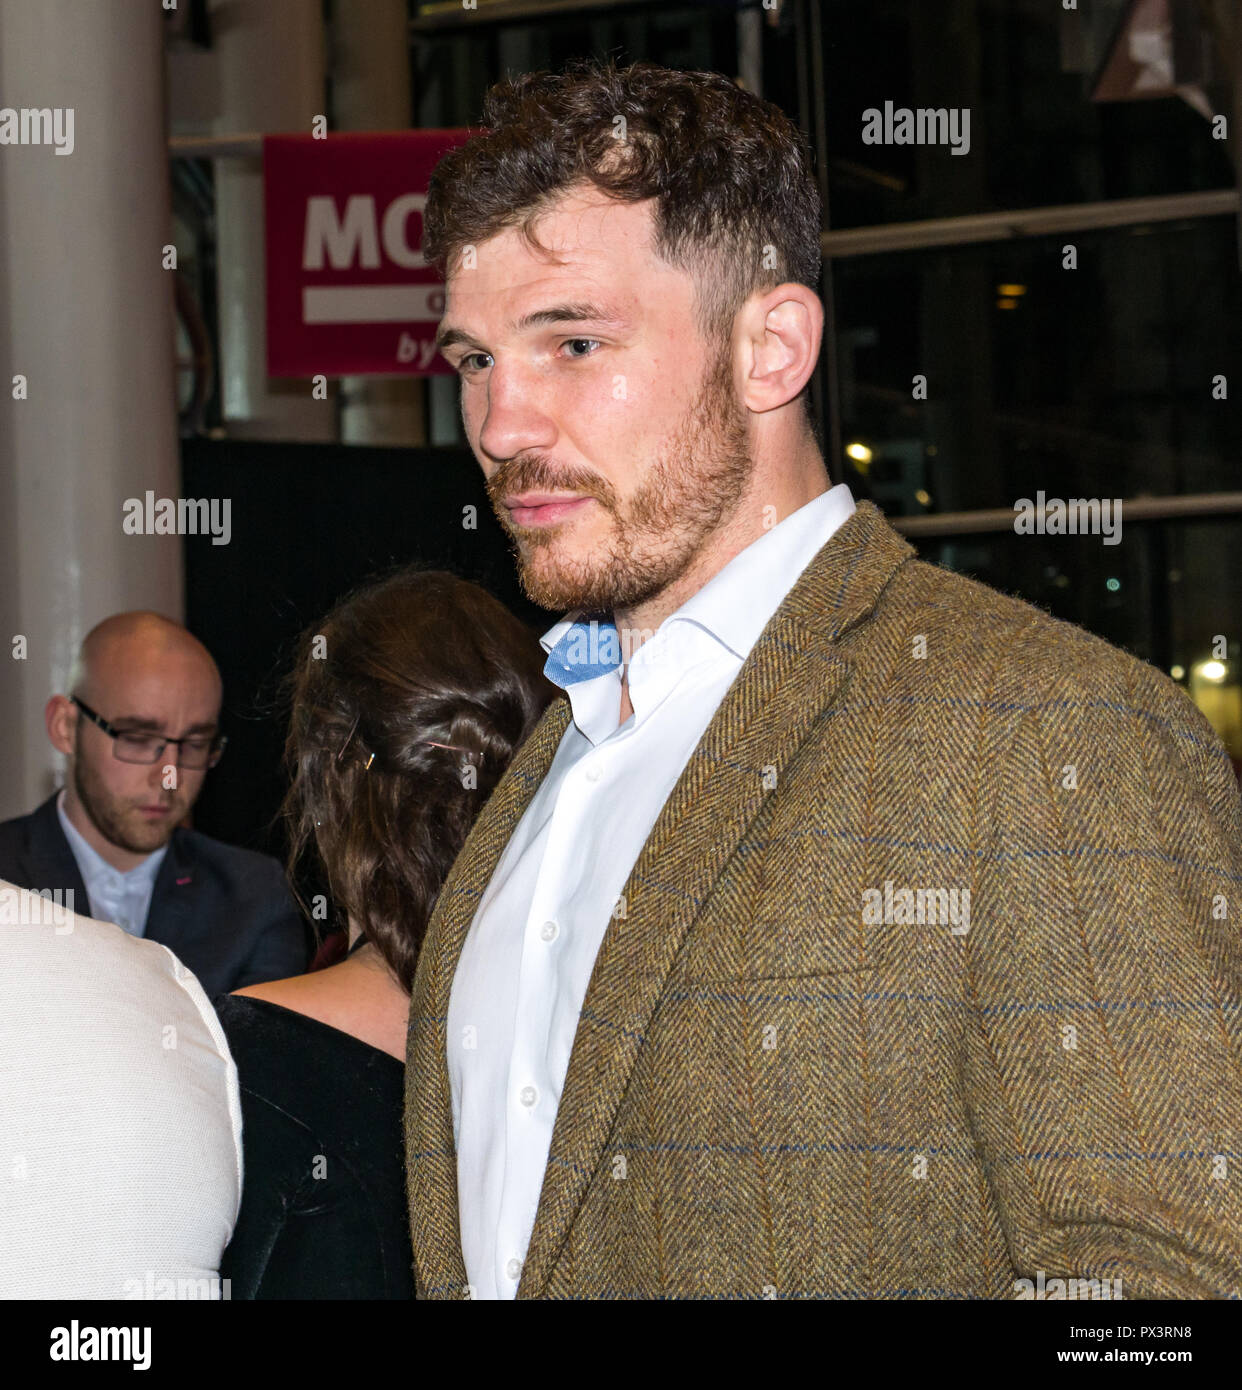 Vue Omni, Leith Walk, Edinburgh, Scotland, United Kingdom, 19th October 2018. Stars attend the Scottish premiere of Netflix Outlaw King. The red carpet is laid out the for the cast and team producing Netflix’s latest blockbuster film, Outlaw King. Tim Swinson, Glasgow Warriors rugby player and Scottish rugby team player Stock Photo